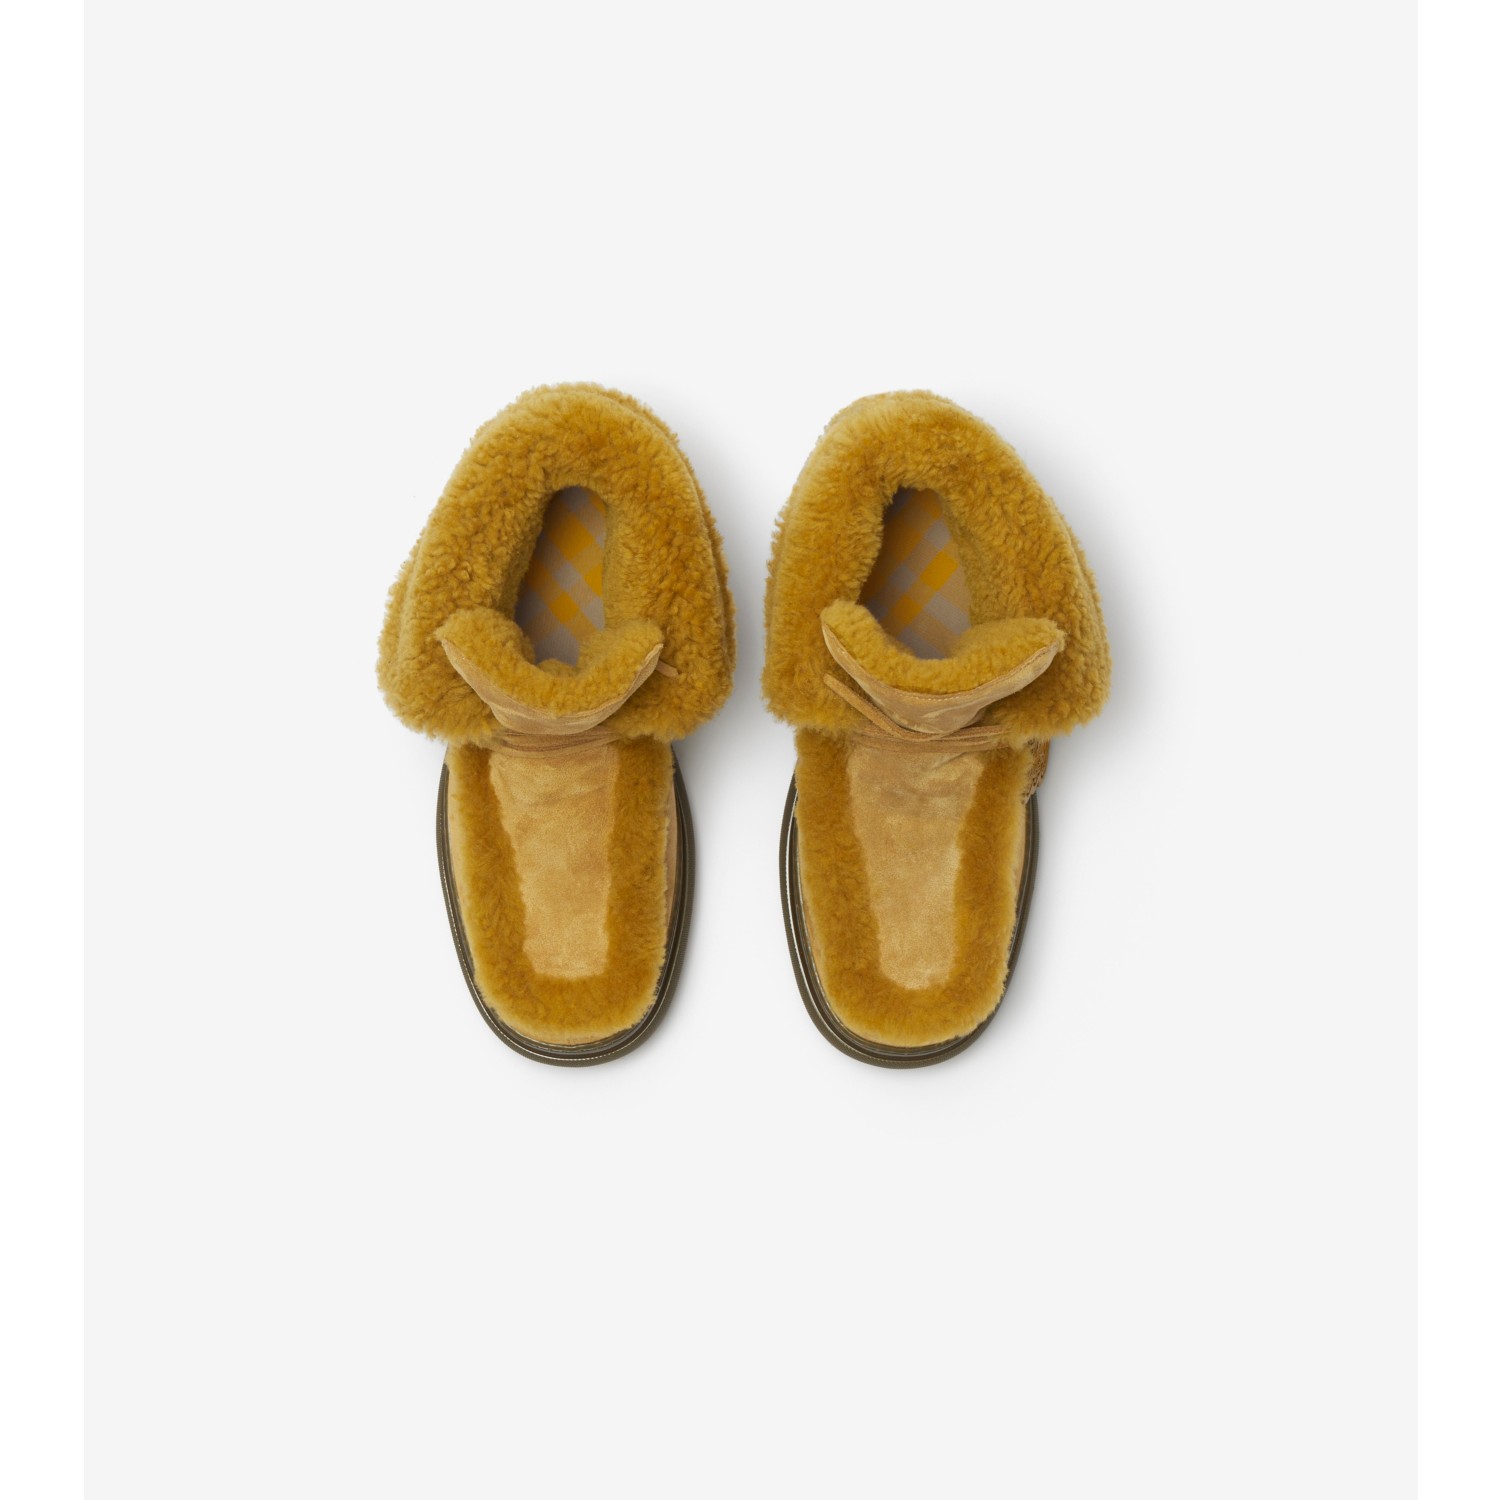 Shearling Creeper High Shoes in Manilla/amber yellow - Women | Burberry ...